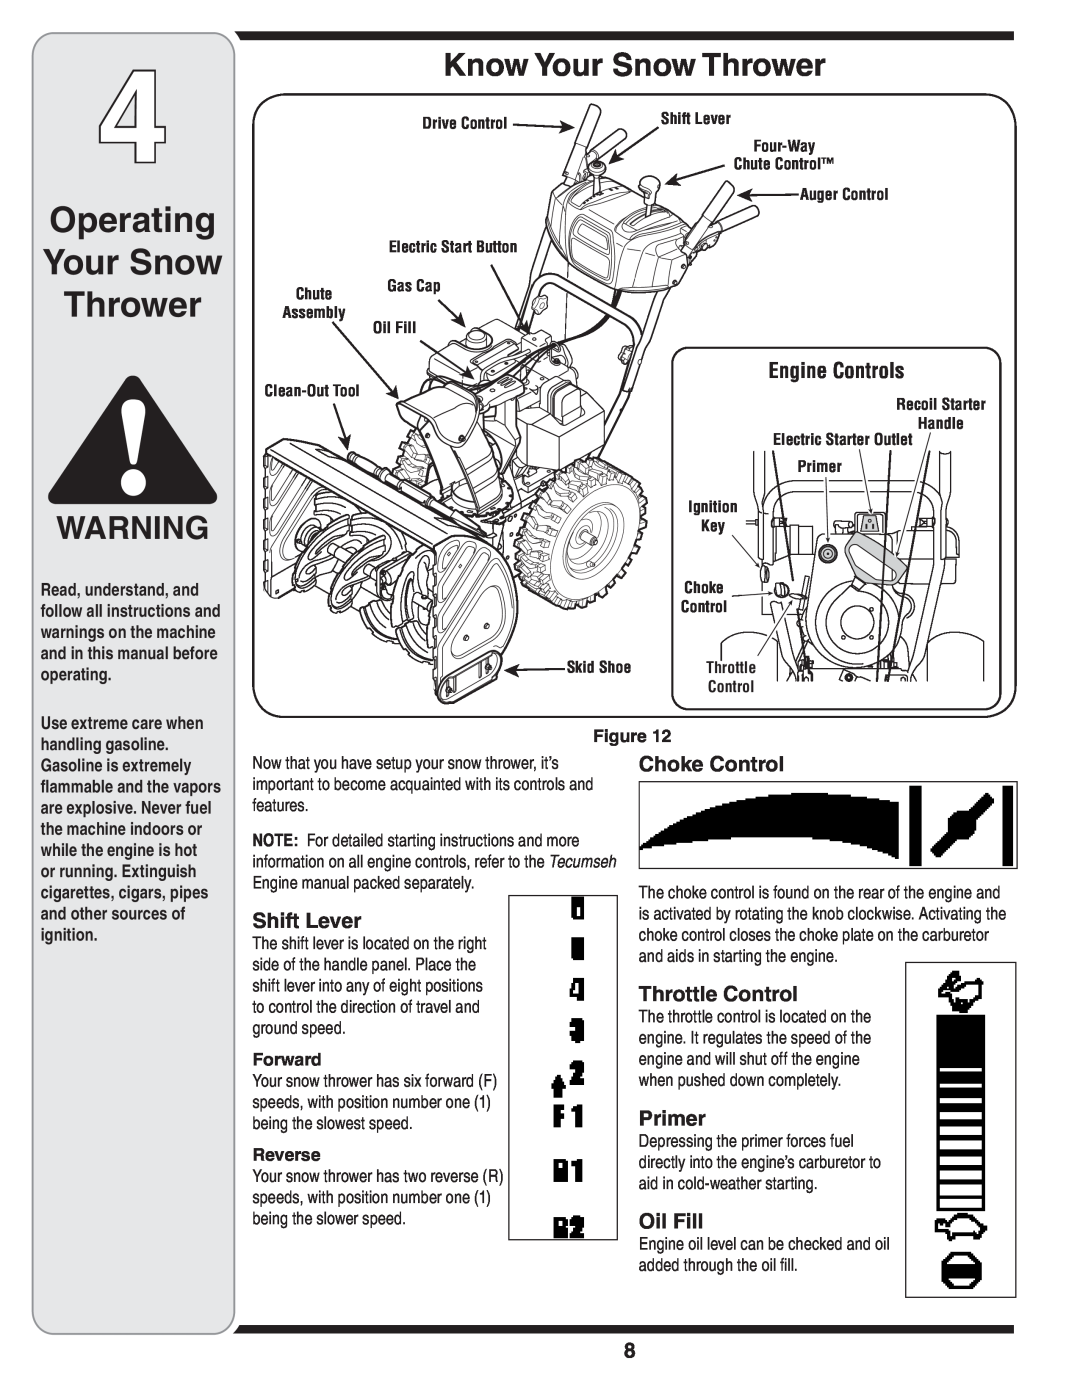 Cub Cadet WE 26 warranty Operating Your Snow Thrower, Know Your Snow Thrower, Figure, Forward, Reverse 